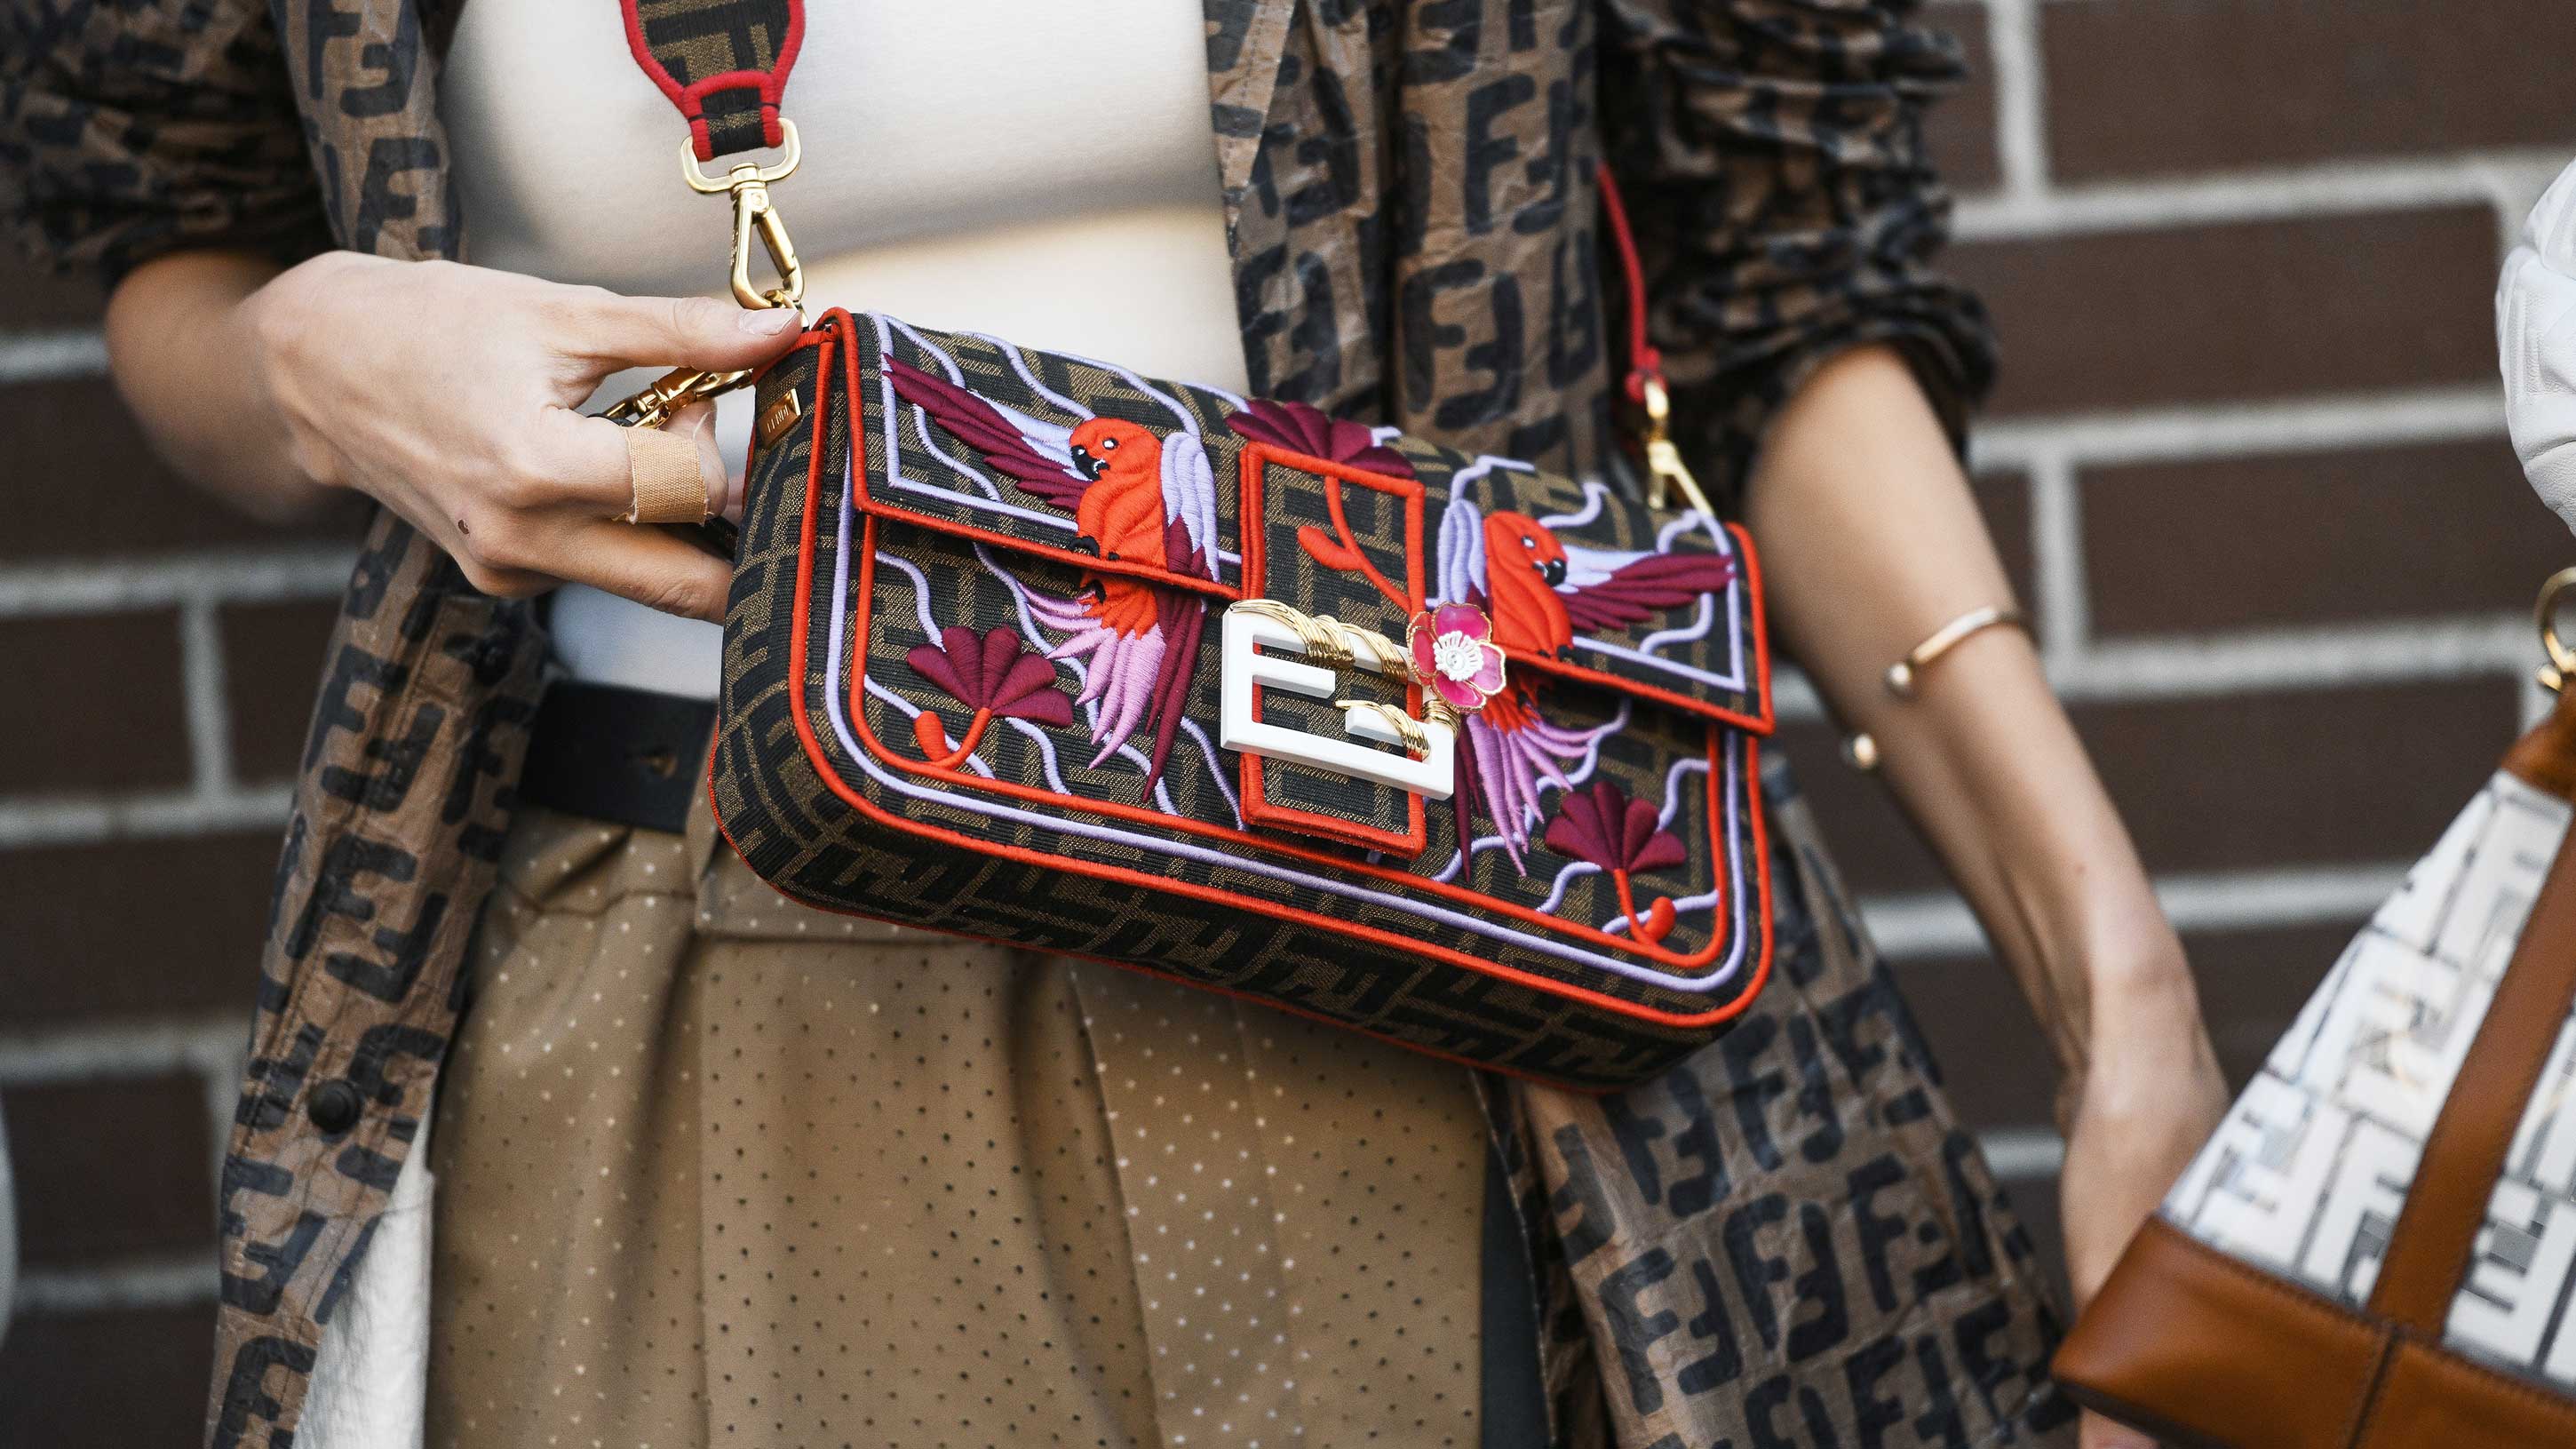 The 2000s are back: these designer bags are now hip again!